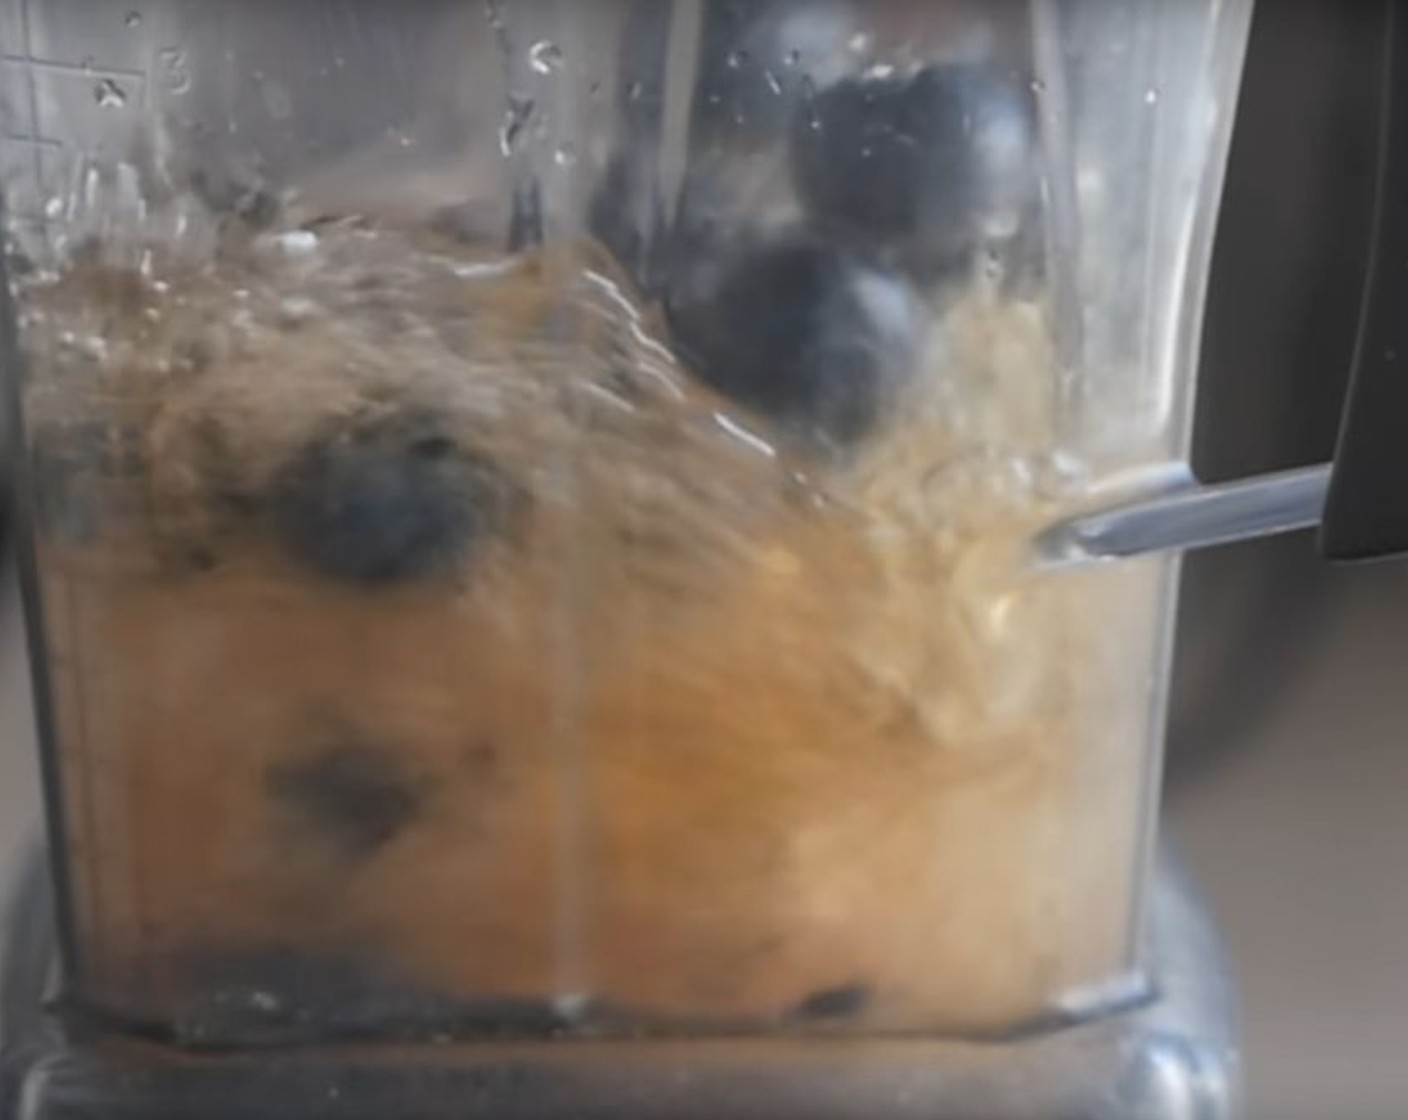 step 2 Blend the Fresh Blueberry (1/2 cup) with Apple Juice (1 cup) in a blender until smooth.